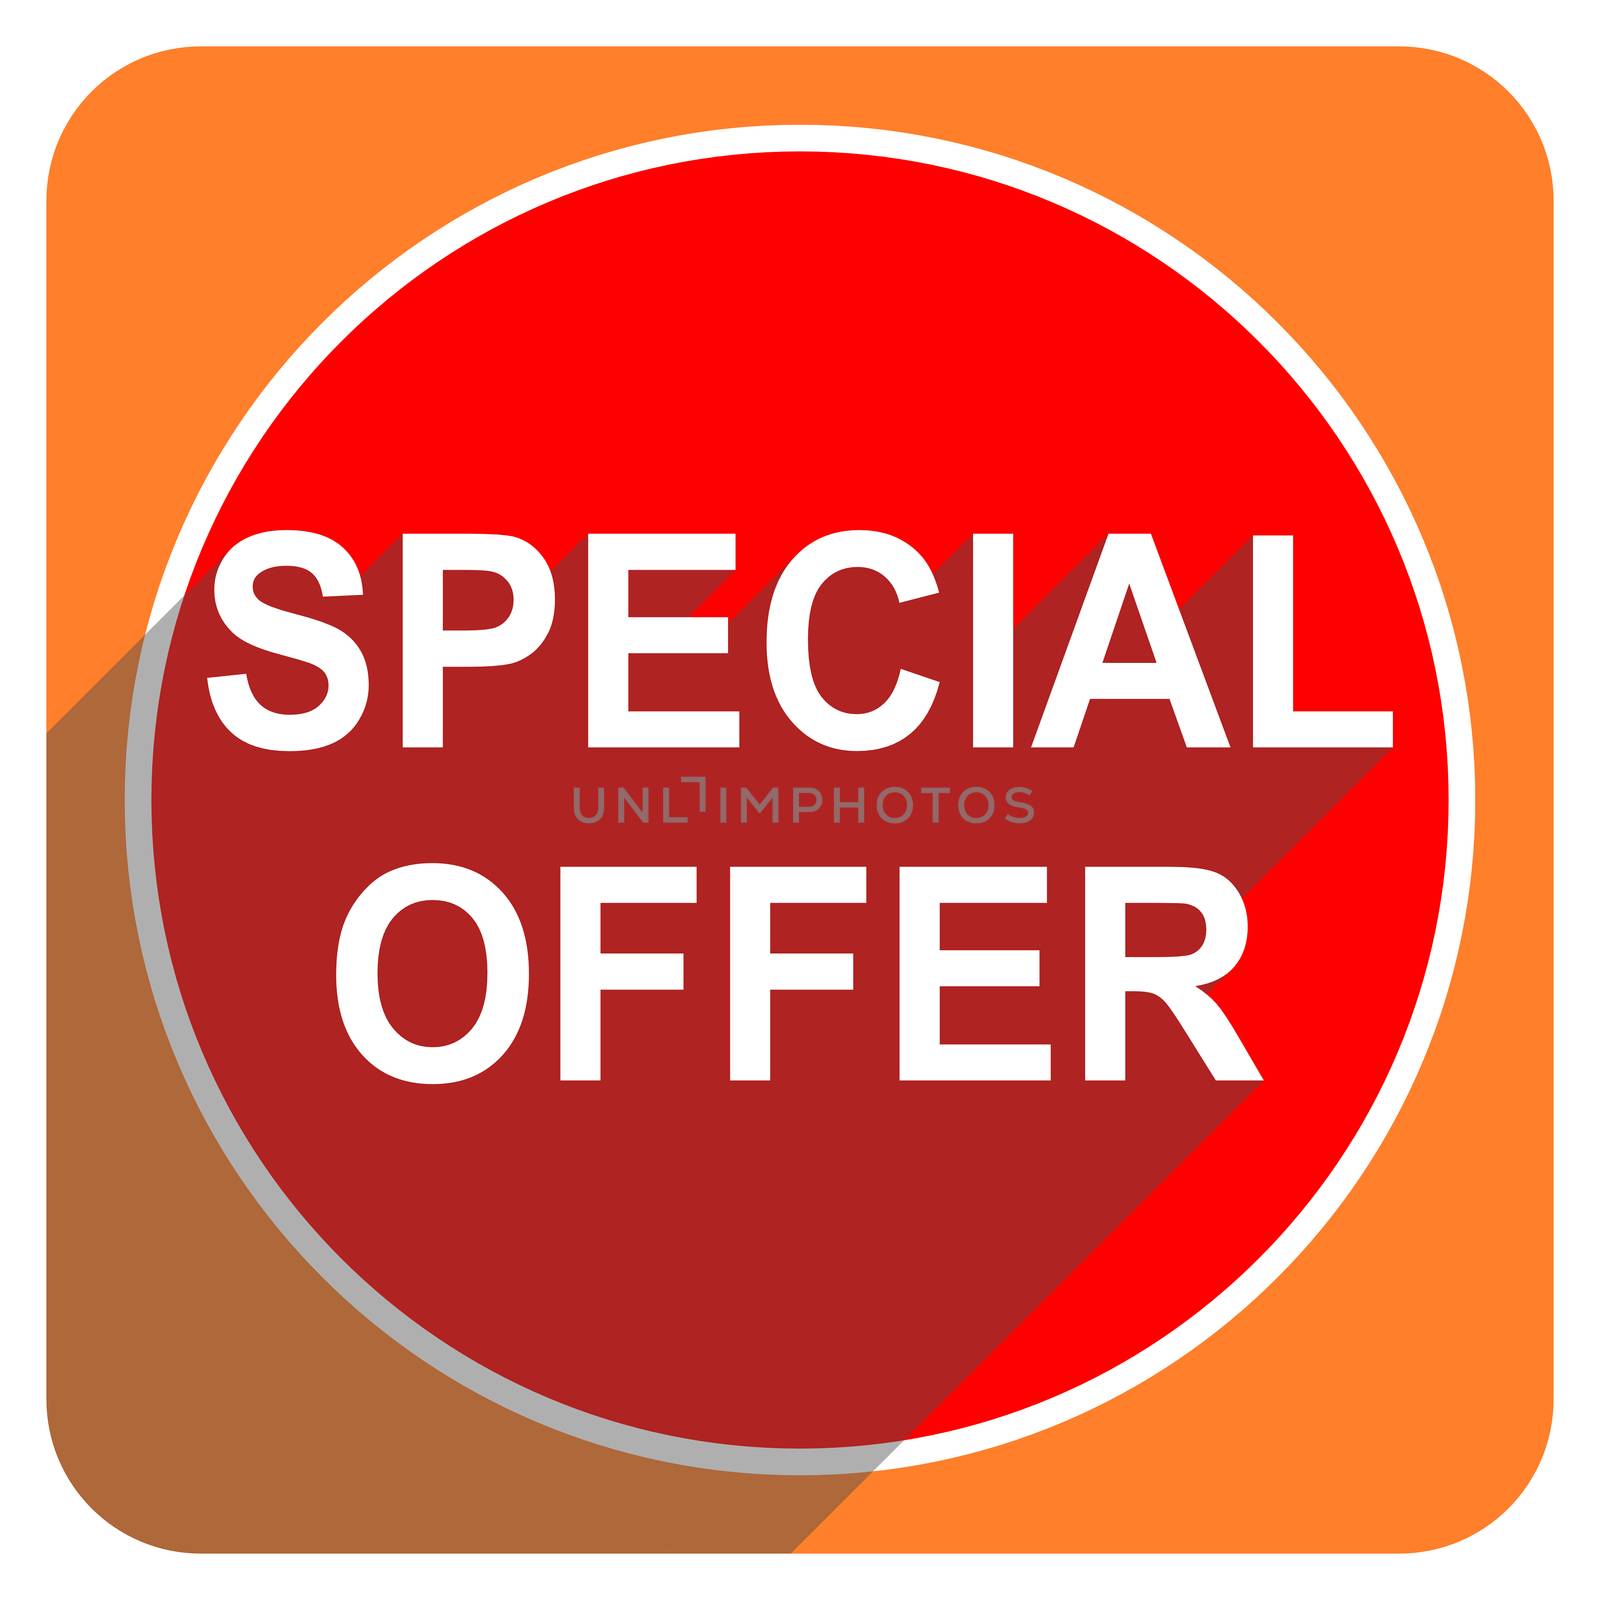 special offer red flat icon isolated by alexwhite